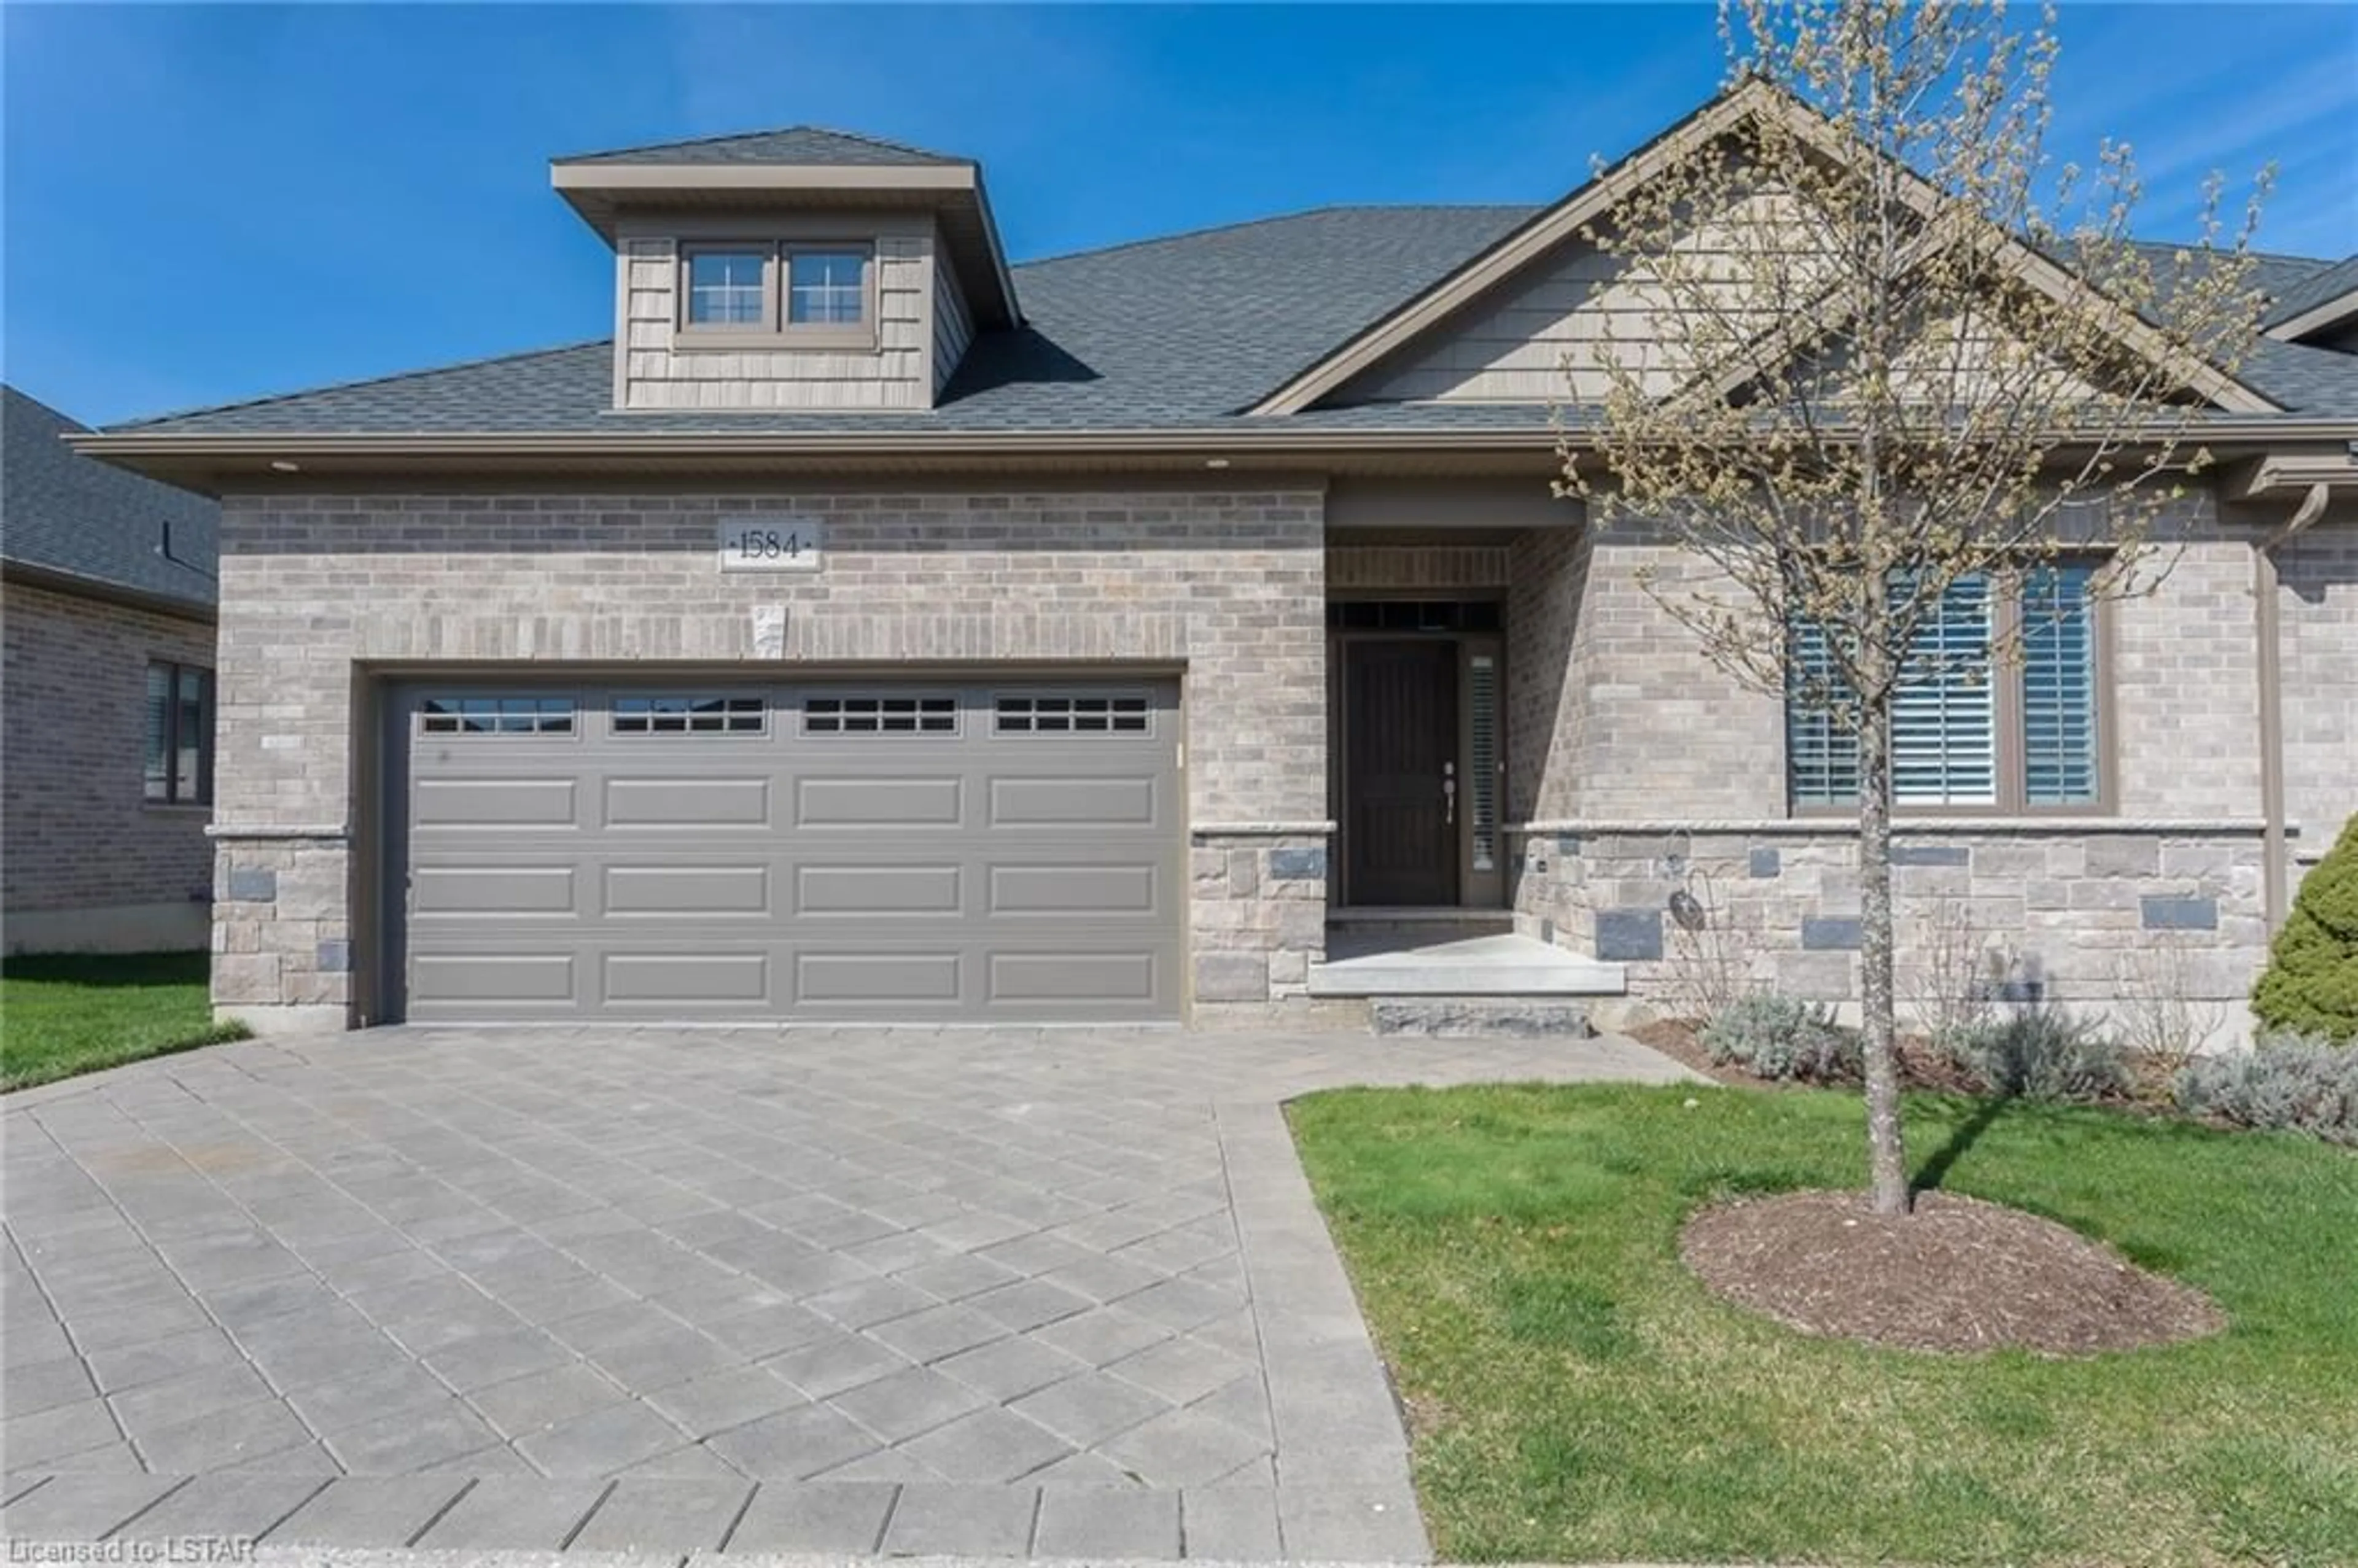 Home with brick exterior material for 1584 Moe Norman Way, London Ontario N6K 5R5